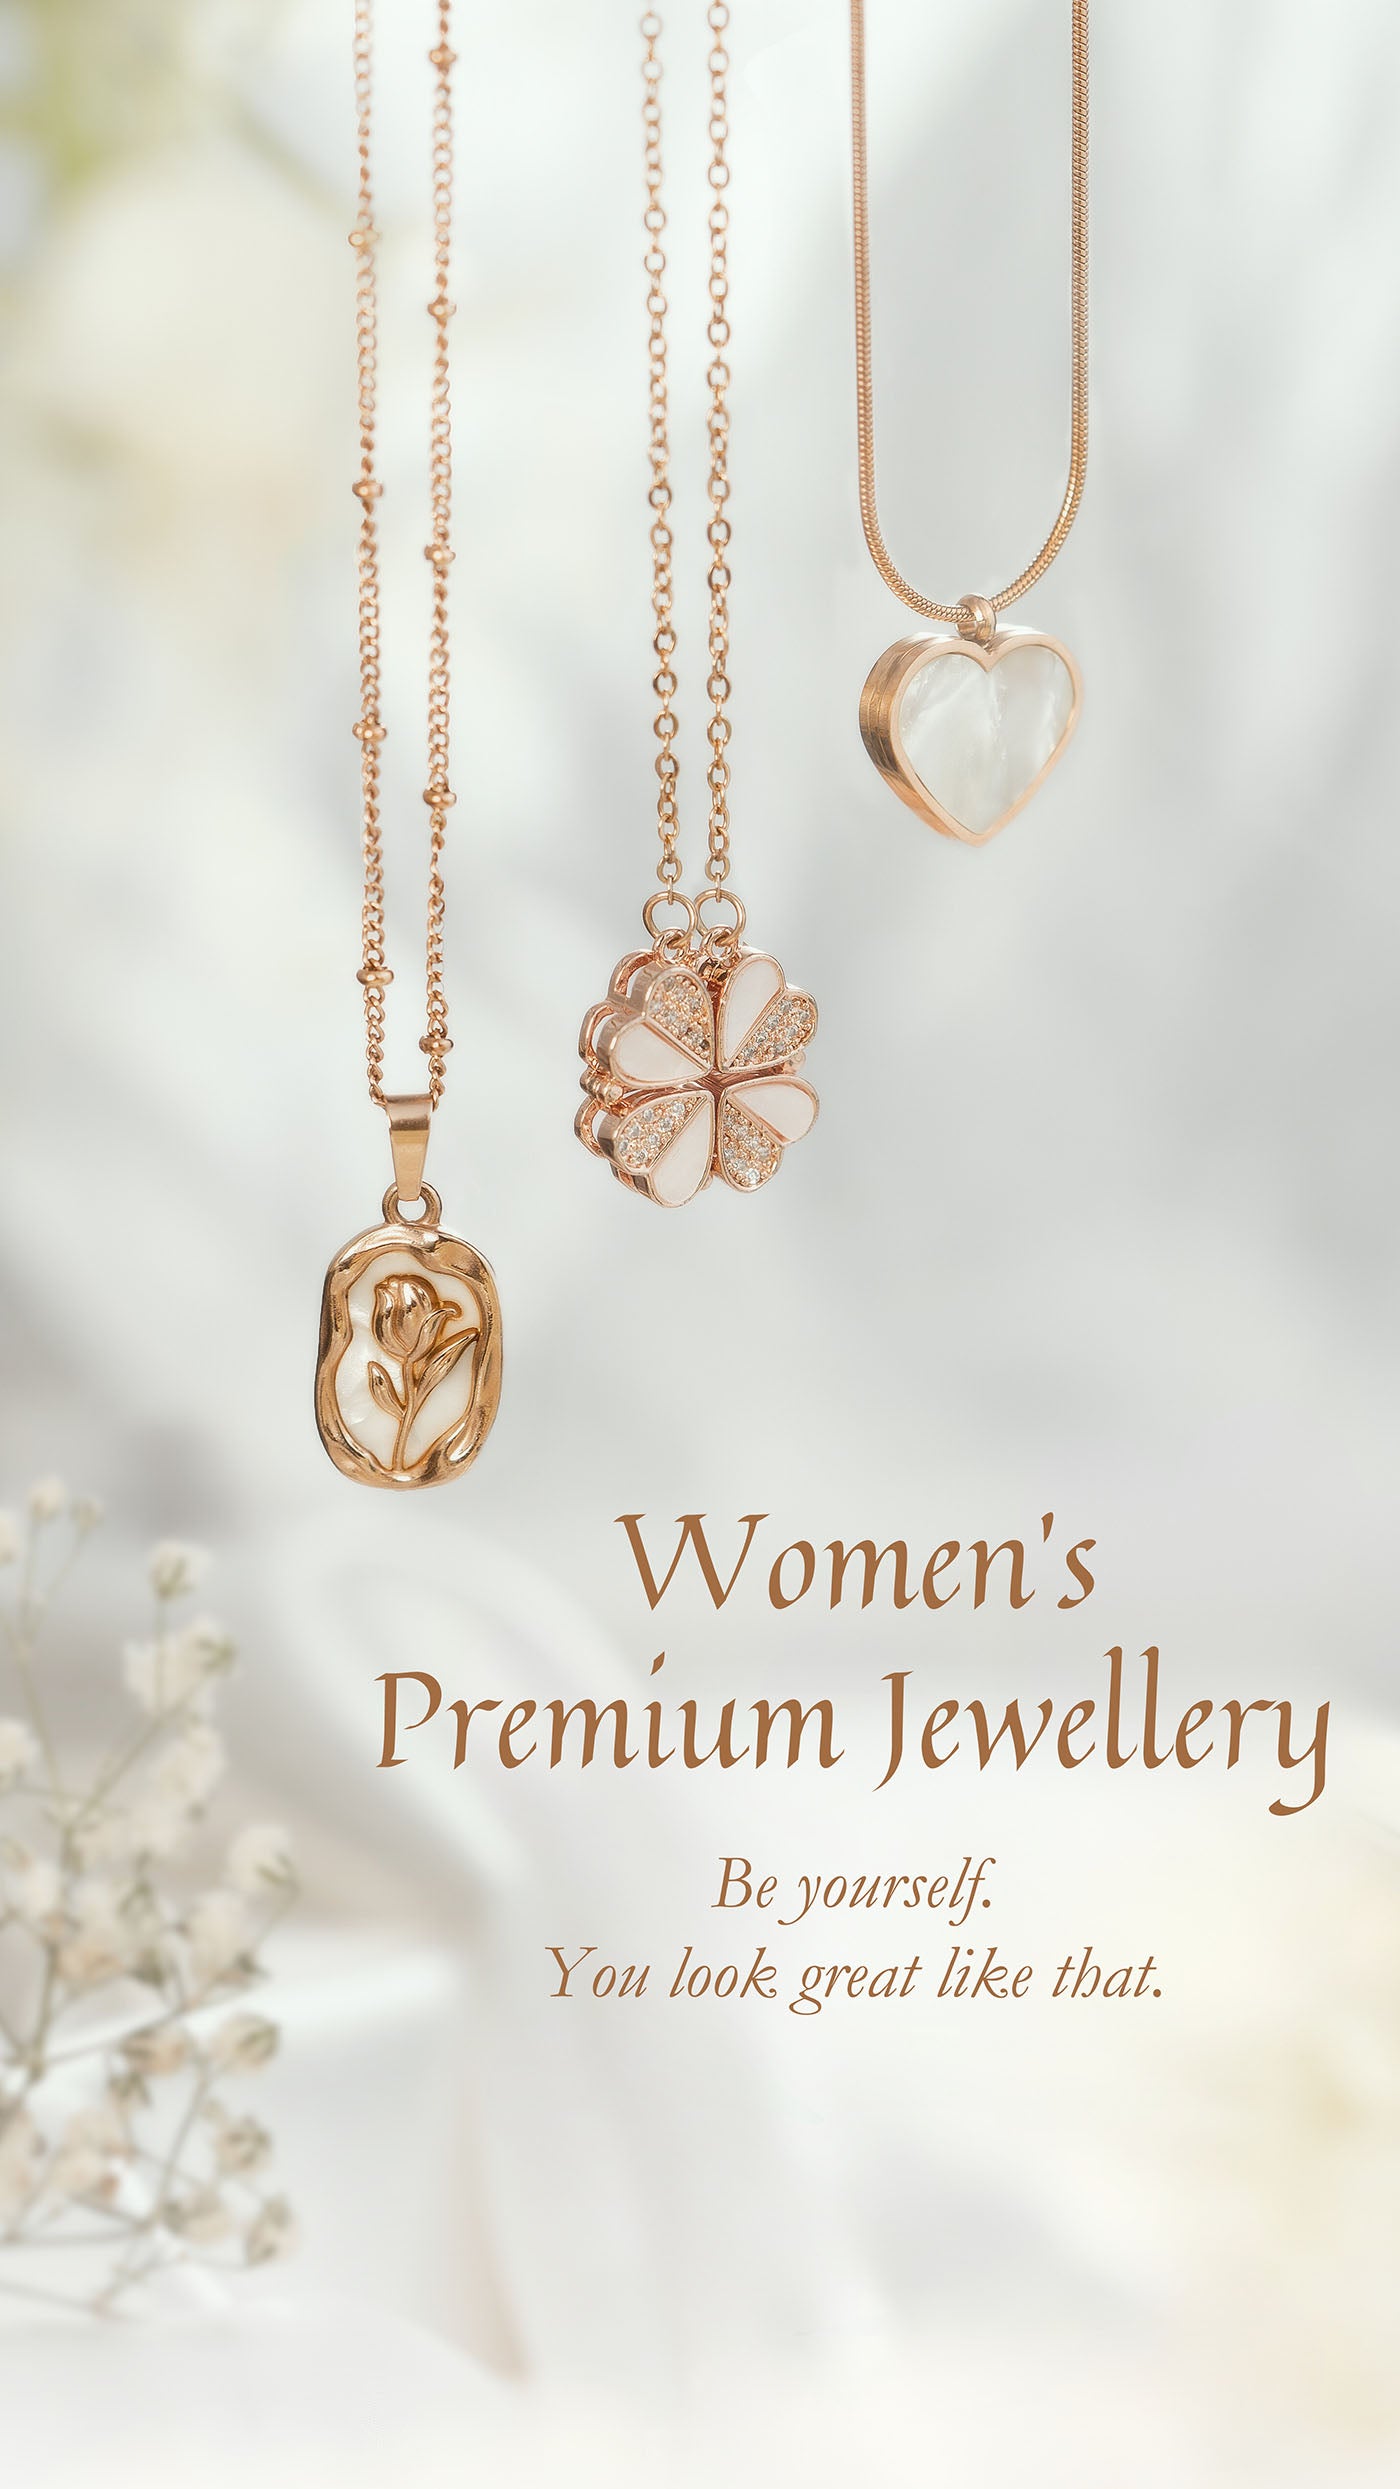 Women Premium Jewellery. Necklaces of stainless in rose gold that are waterproof, anti-tarnish and skin-friendly.